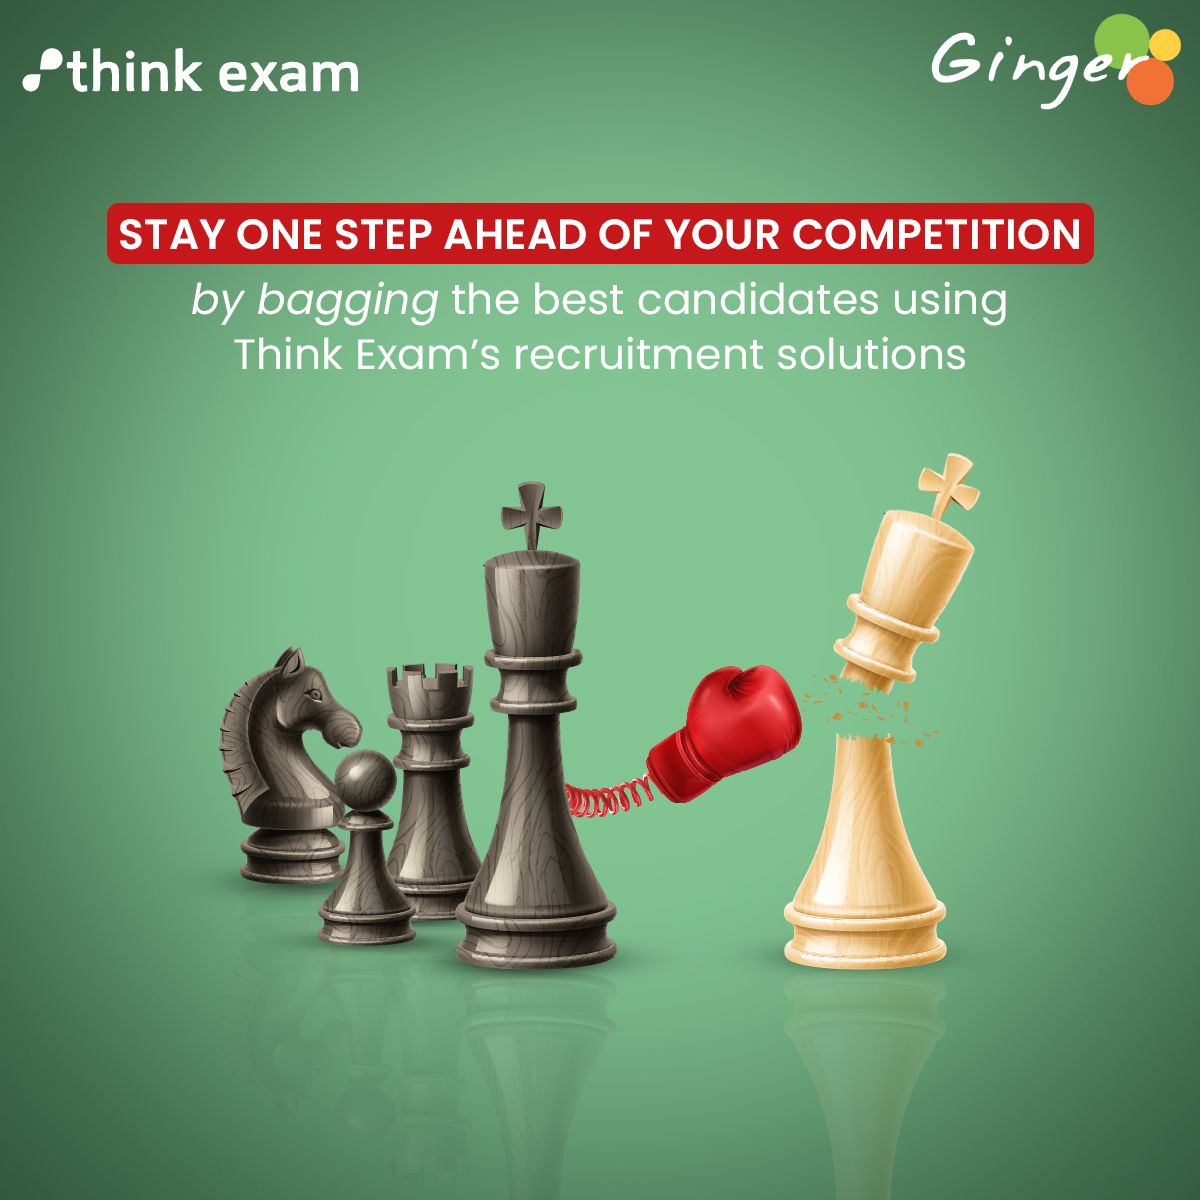 Stay ahead of the #competition! Take your #hiring to the next level and get the best #talent by leveraging the power of Think Exam’s advanced library of #tests that help you get the best hires without any strenuous efforts.

#GingerWebs #StateOfTheArtTechnology #ThinkExam